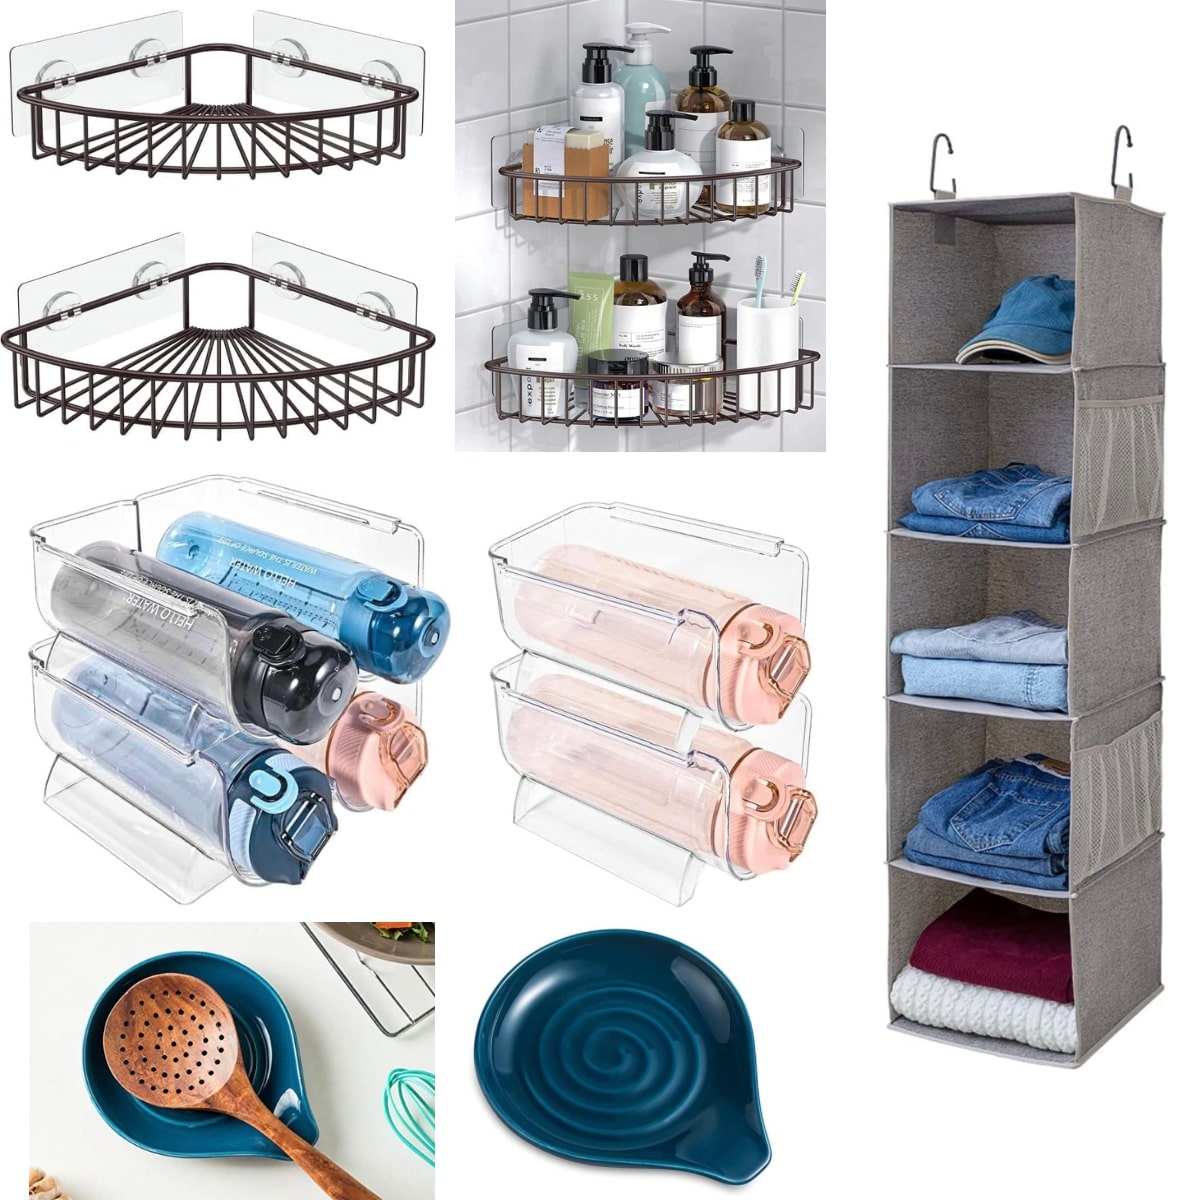 Deals On Useful Home Items